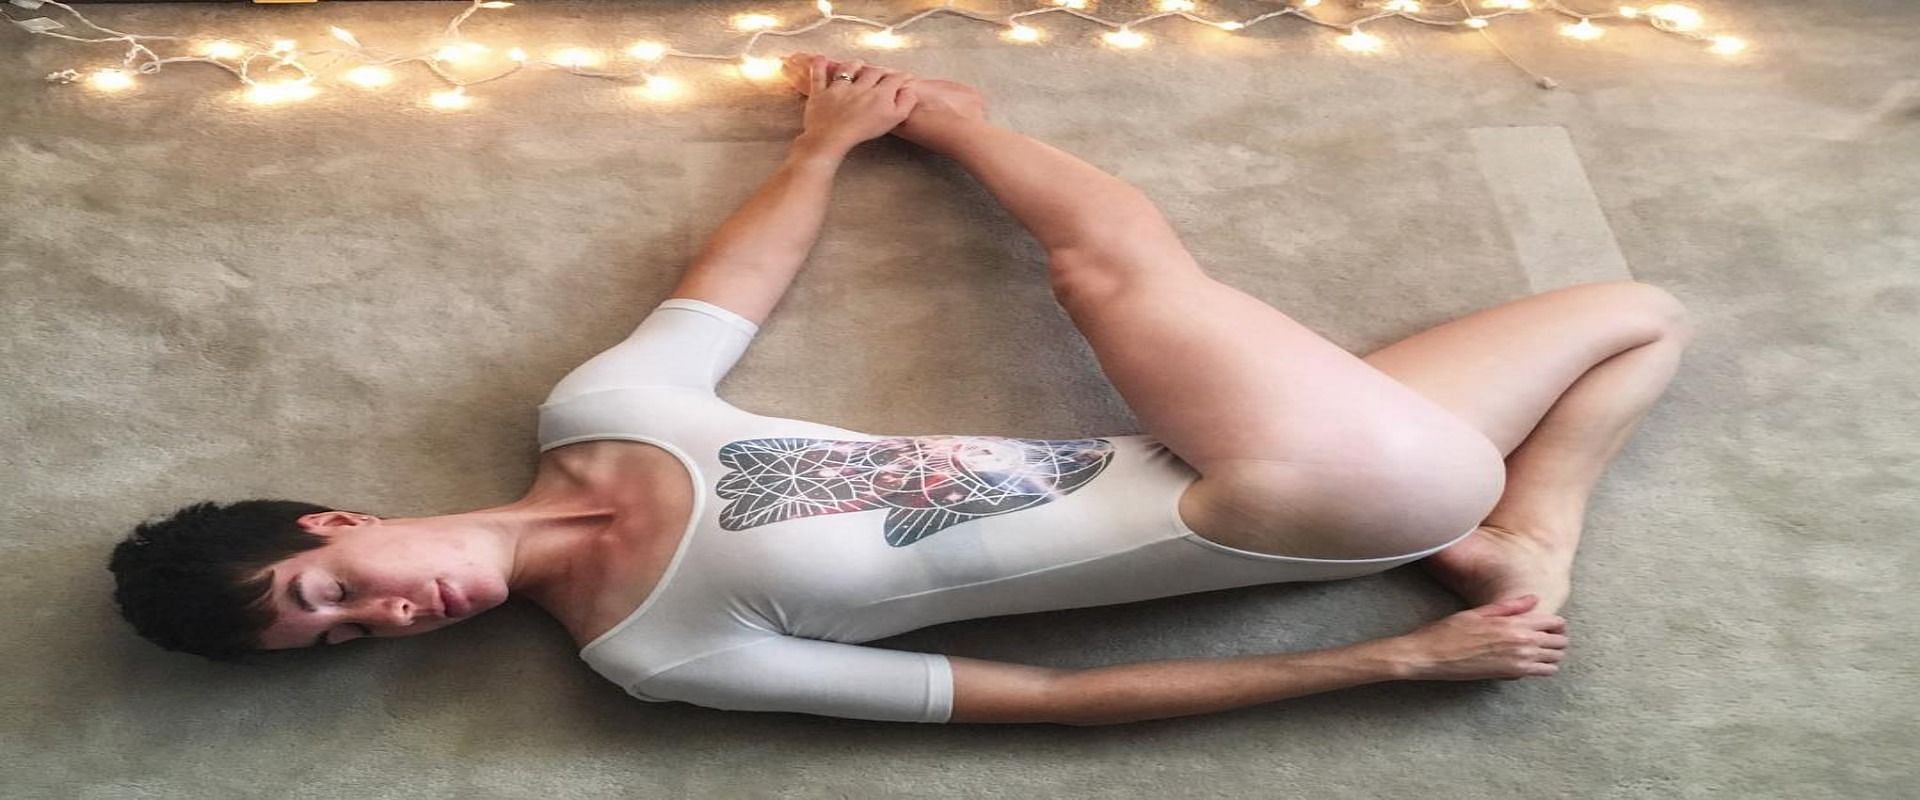 Recovery yoga poses: Reclined Twist (Image by clarissa_mae_/Instagram)